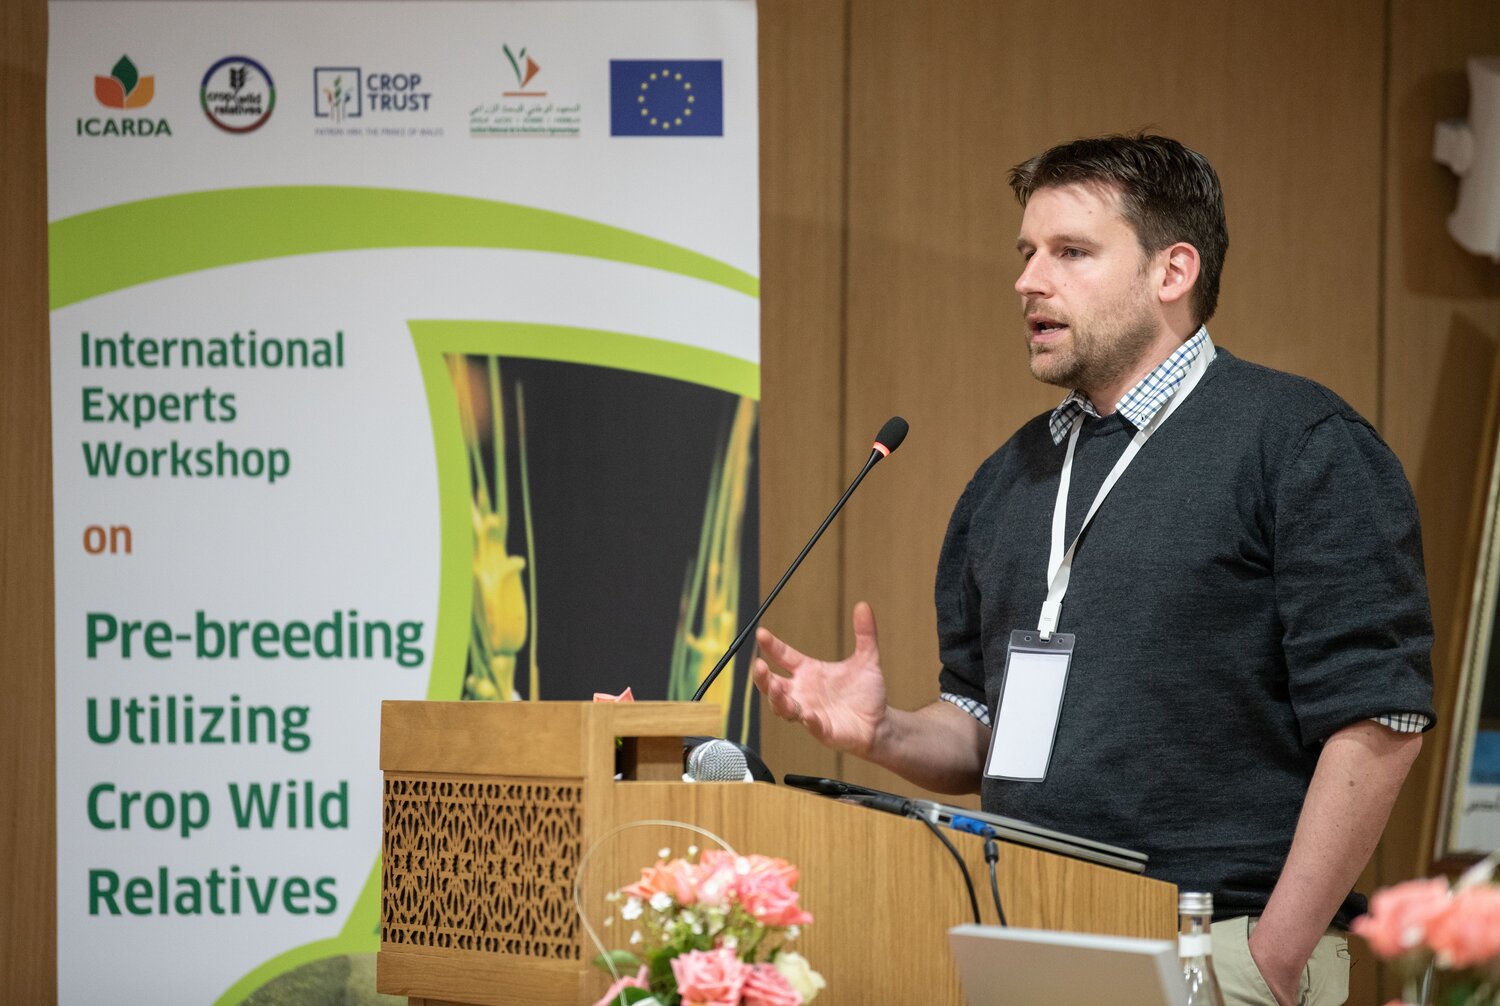 The Crop Trust's Hannes Dempewolf provided closing statements at the First International Experts Workshop on Pre-breeding Utilizing Crop Wild Relatives, ICARDA, Rabat, Morocco, 24-26 April 2019. Photo: Michael Major/Crop Trust